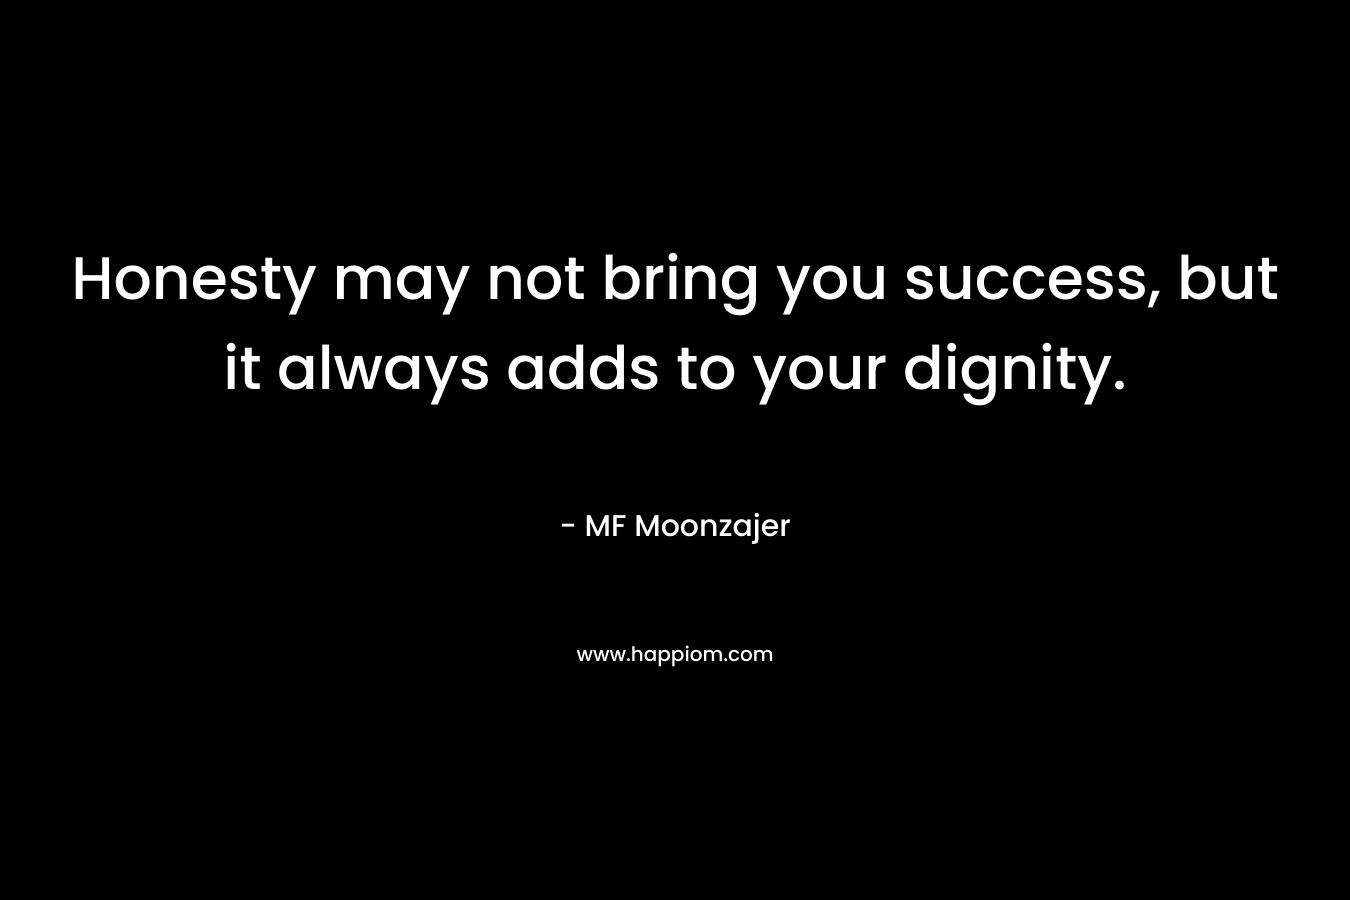 Honesty may not bring you success, but it always adds to your dignity. – MF Moonzajer